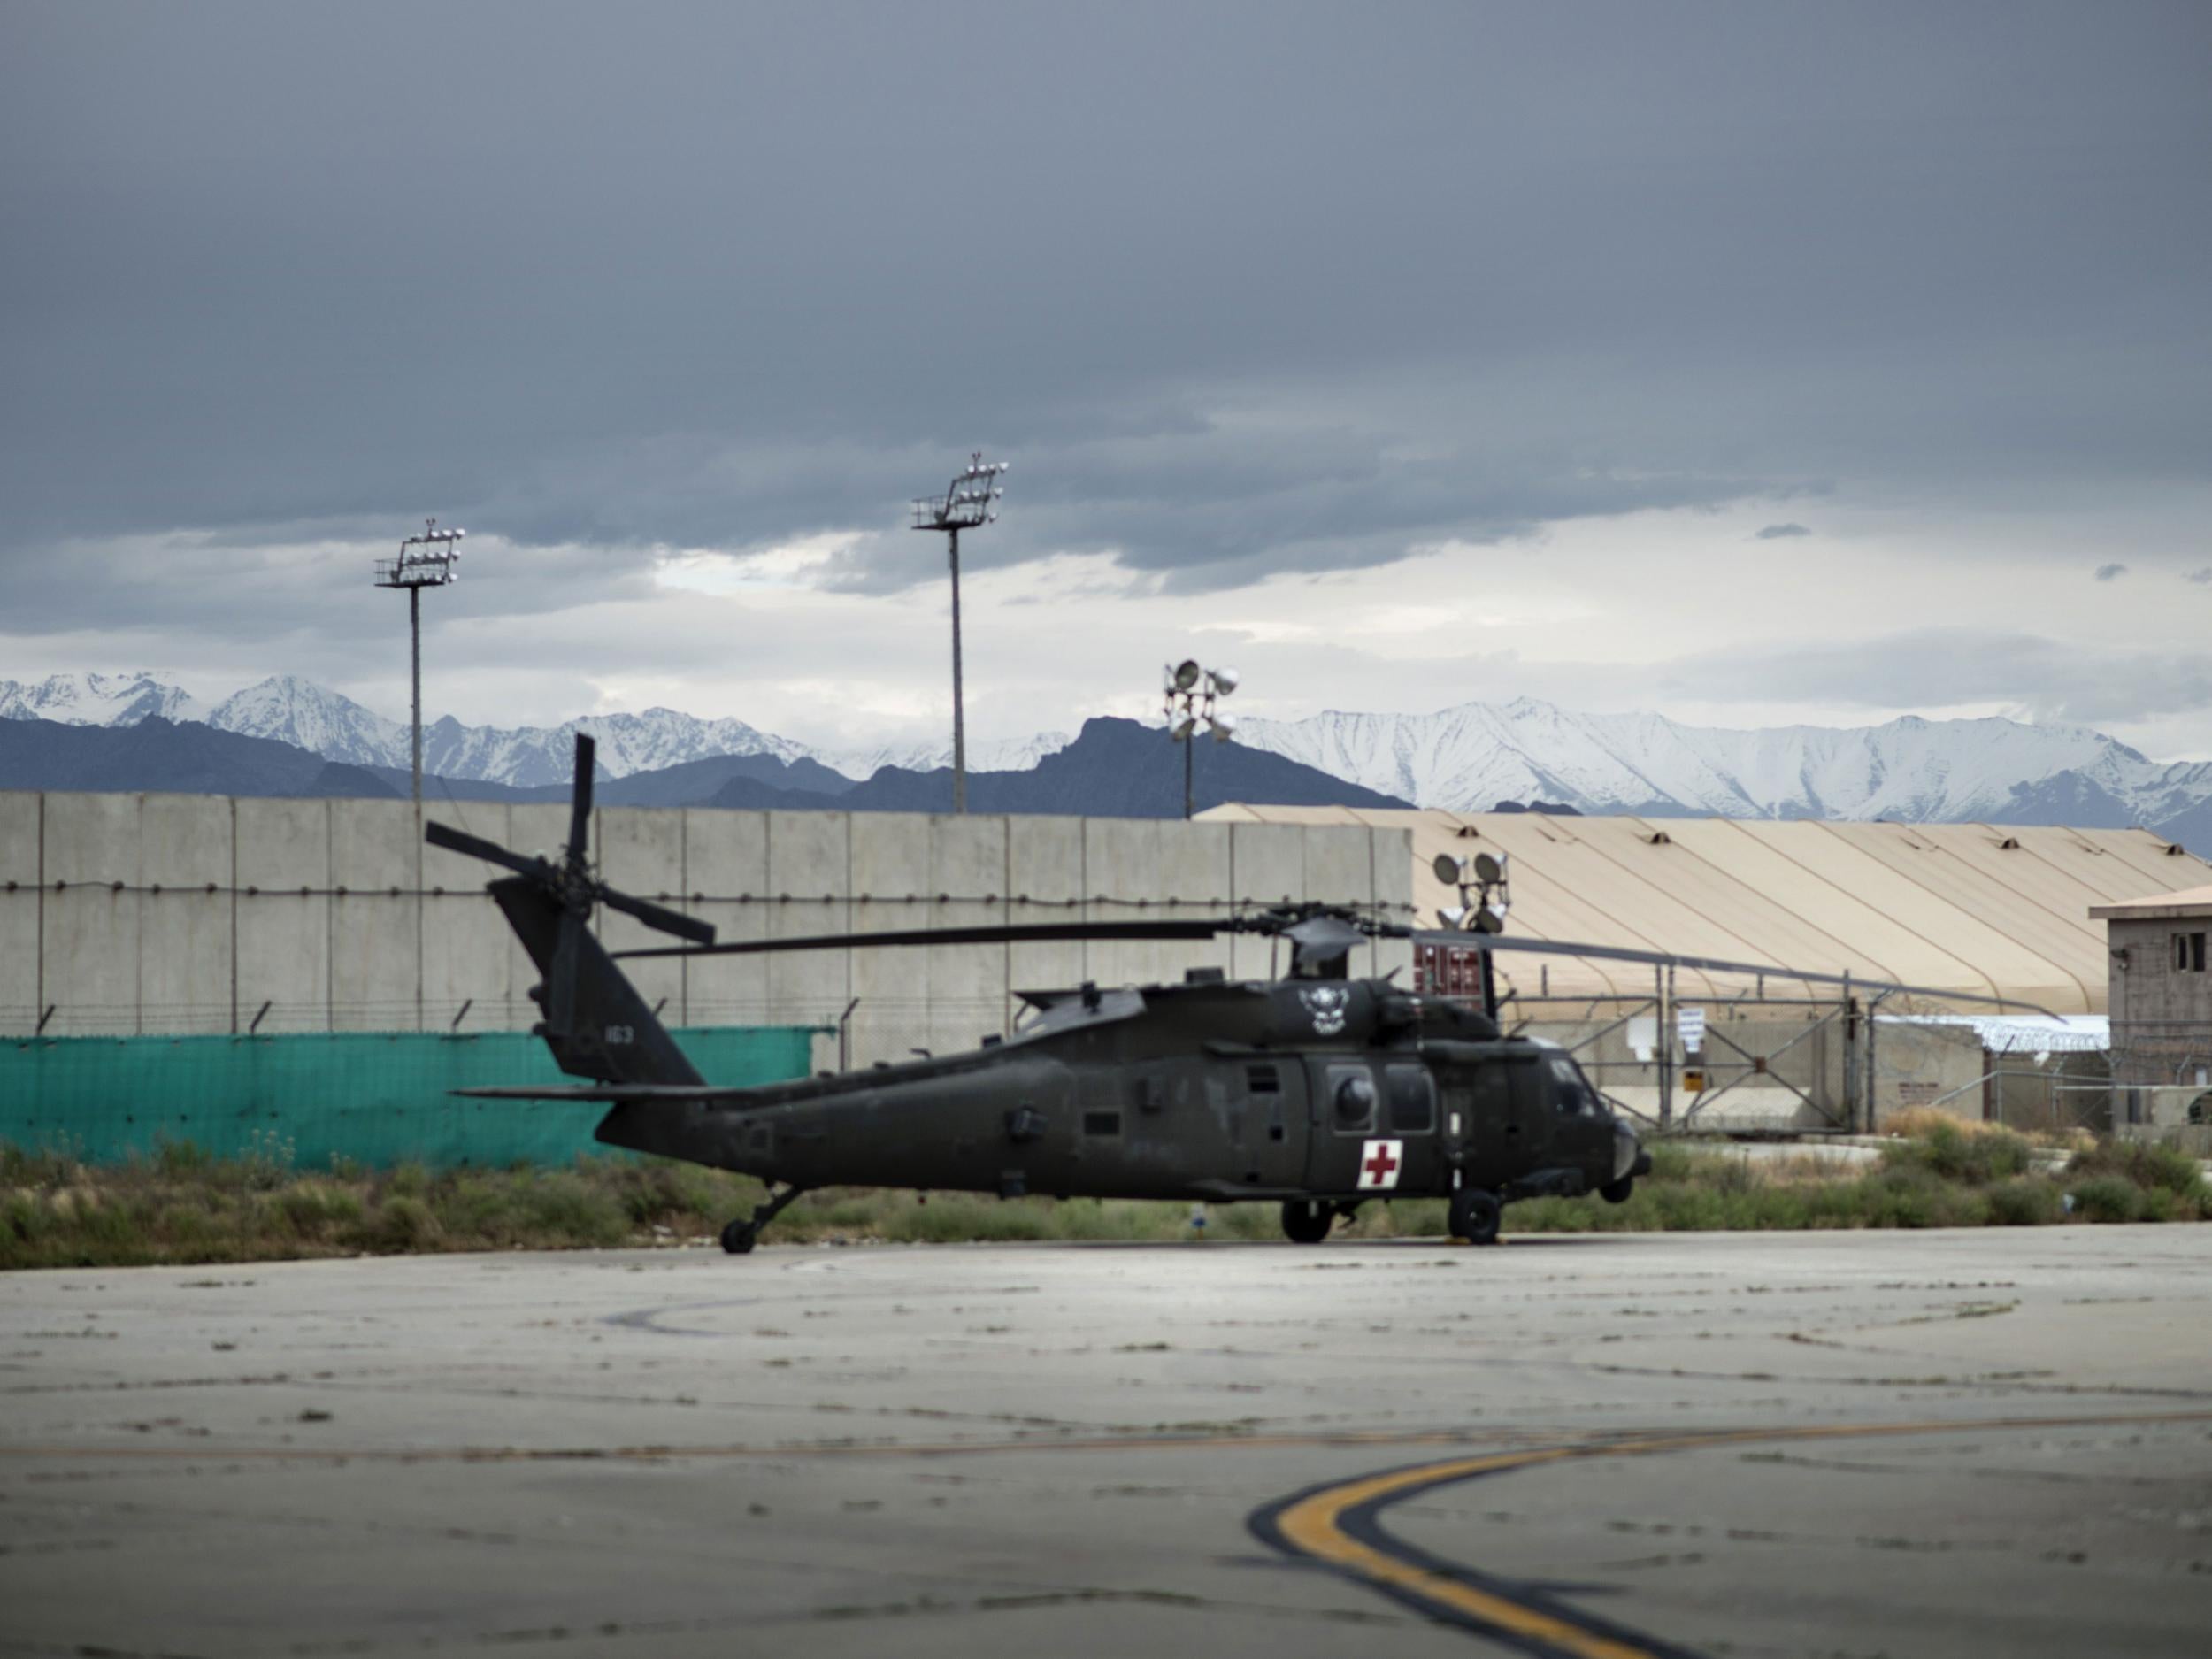 Bagram, 25 miles north of the Afghan capital, Kabul, is one of the main bases for the 9,800 US troops remaining in Afghanistan